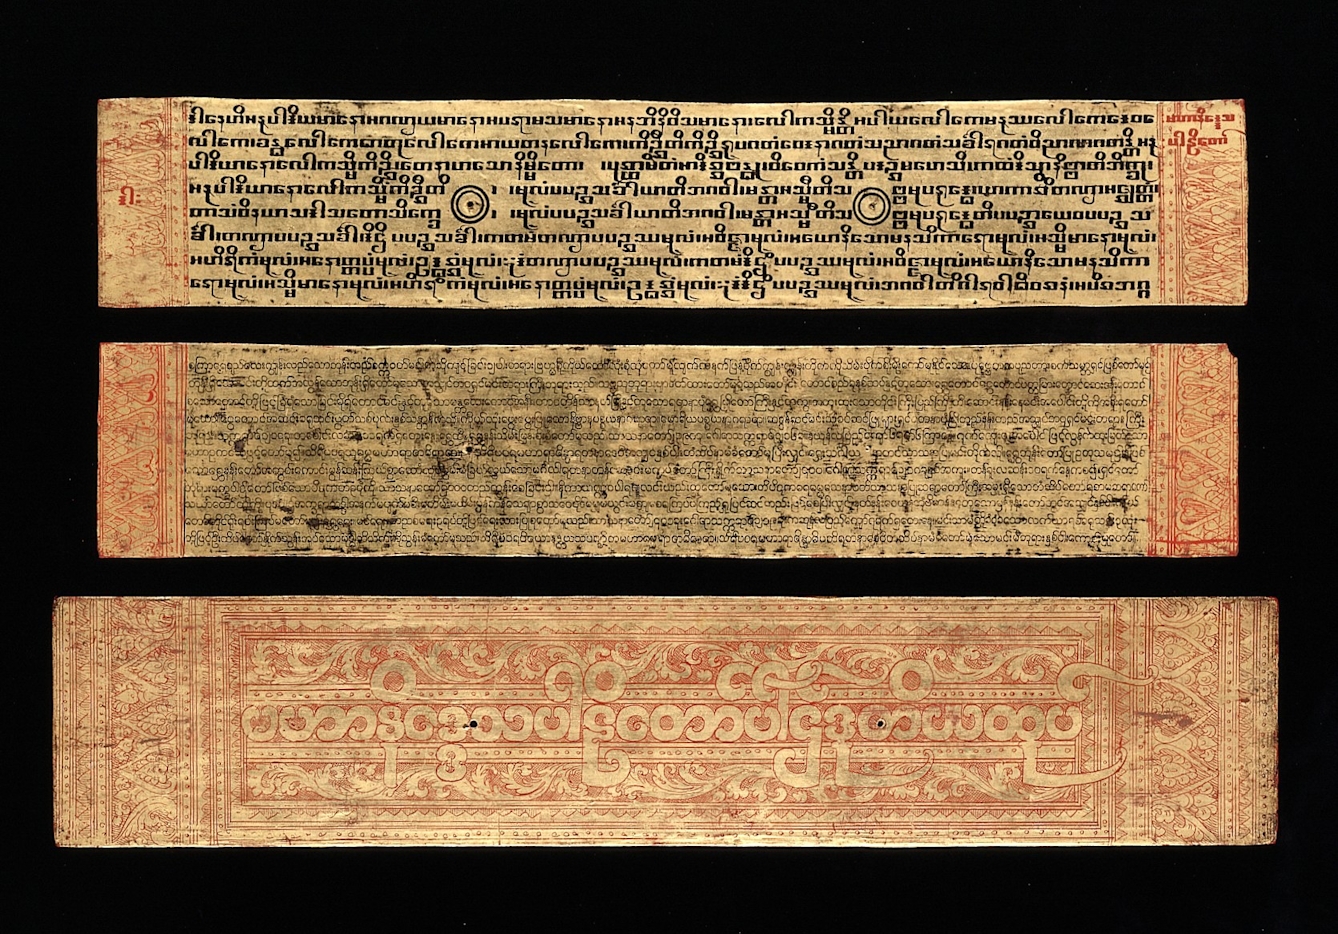 Burmese-Pali manuscript copy of the Buddhist text Mahaniddesa, showing three different types of Burmese script: square on top, round in the centre, and outline at the bottom.